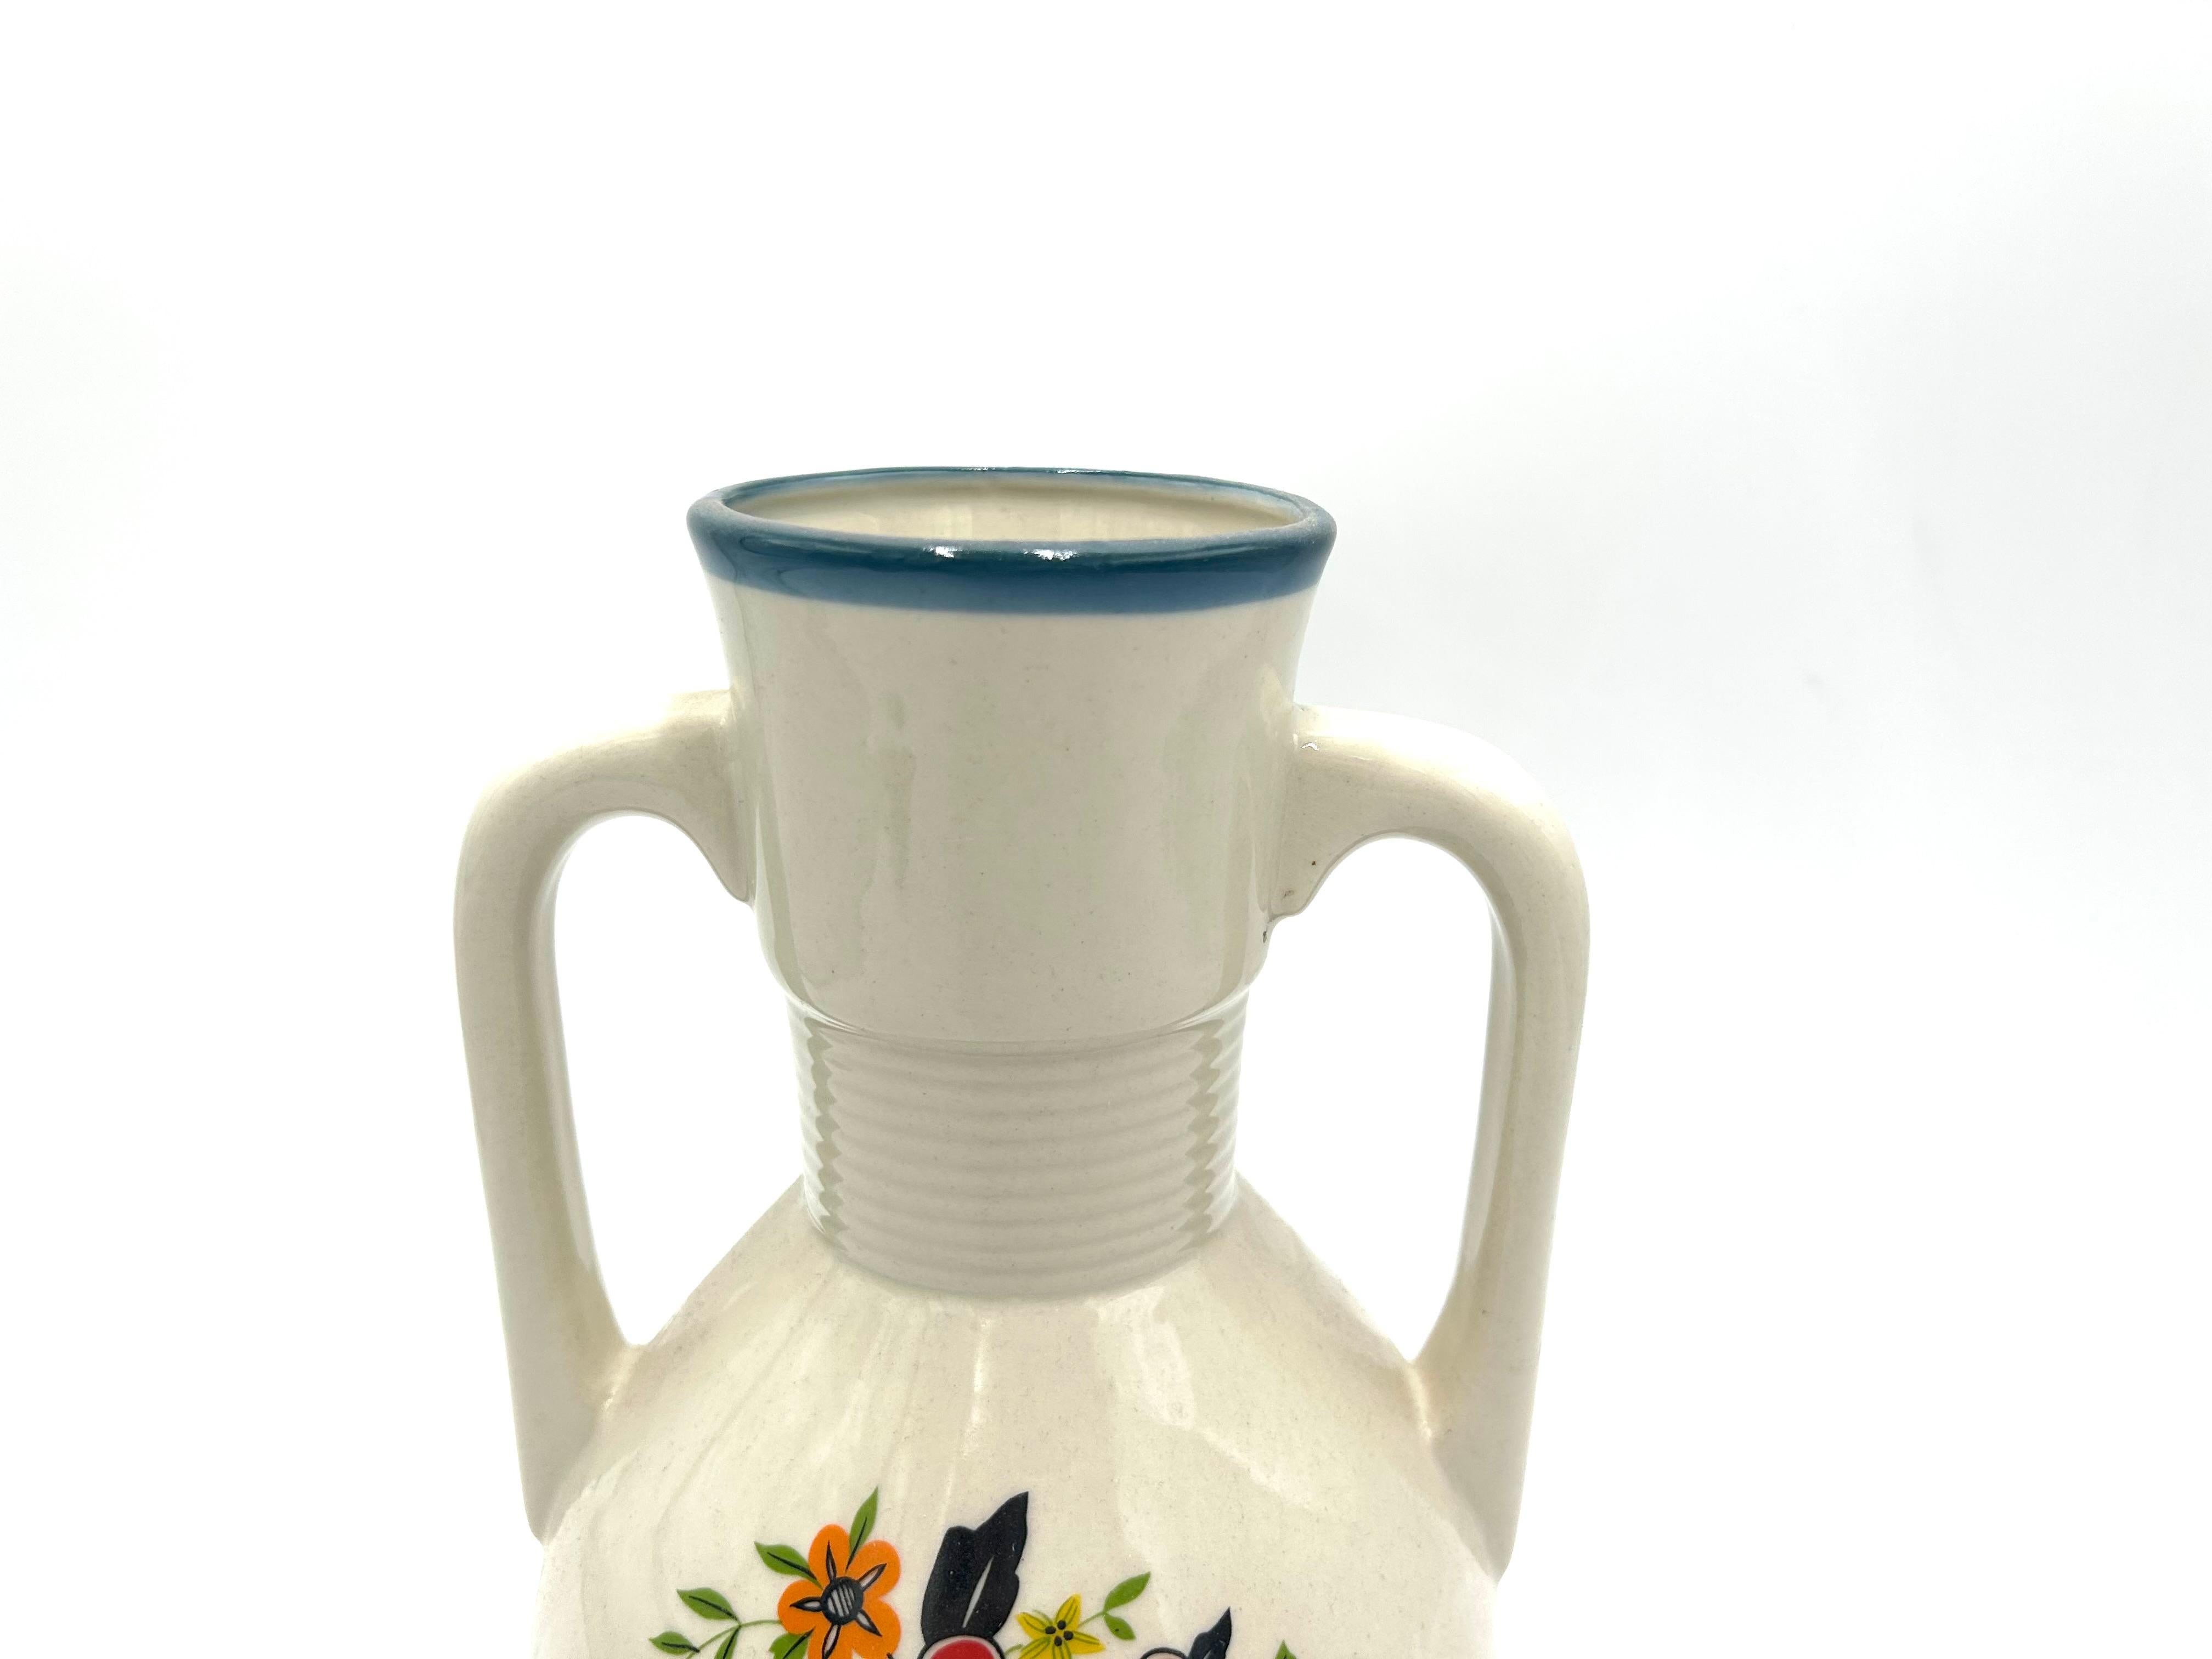 Porcelain jug vase produced by Chodziez in the 1950s.

Very good condition without damage.

Measures: height 25 cm, width 17 cm.